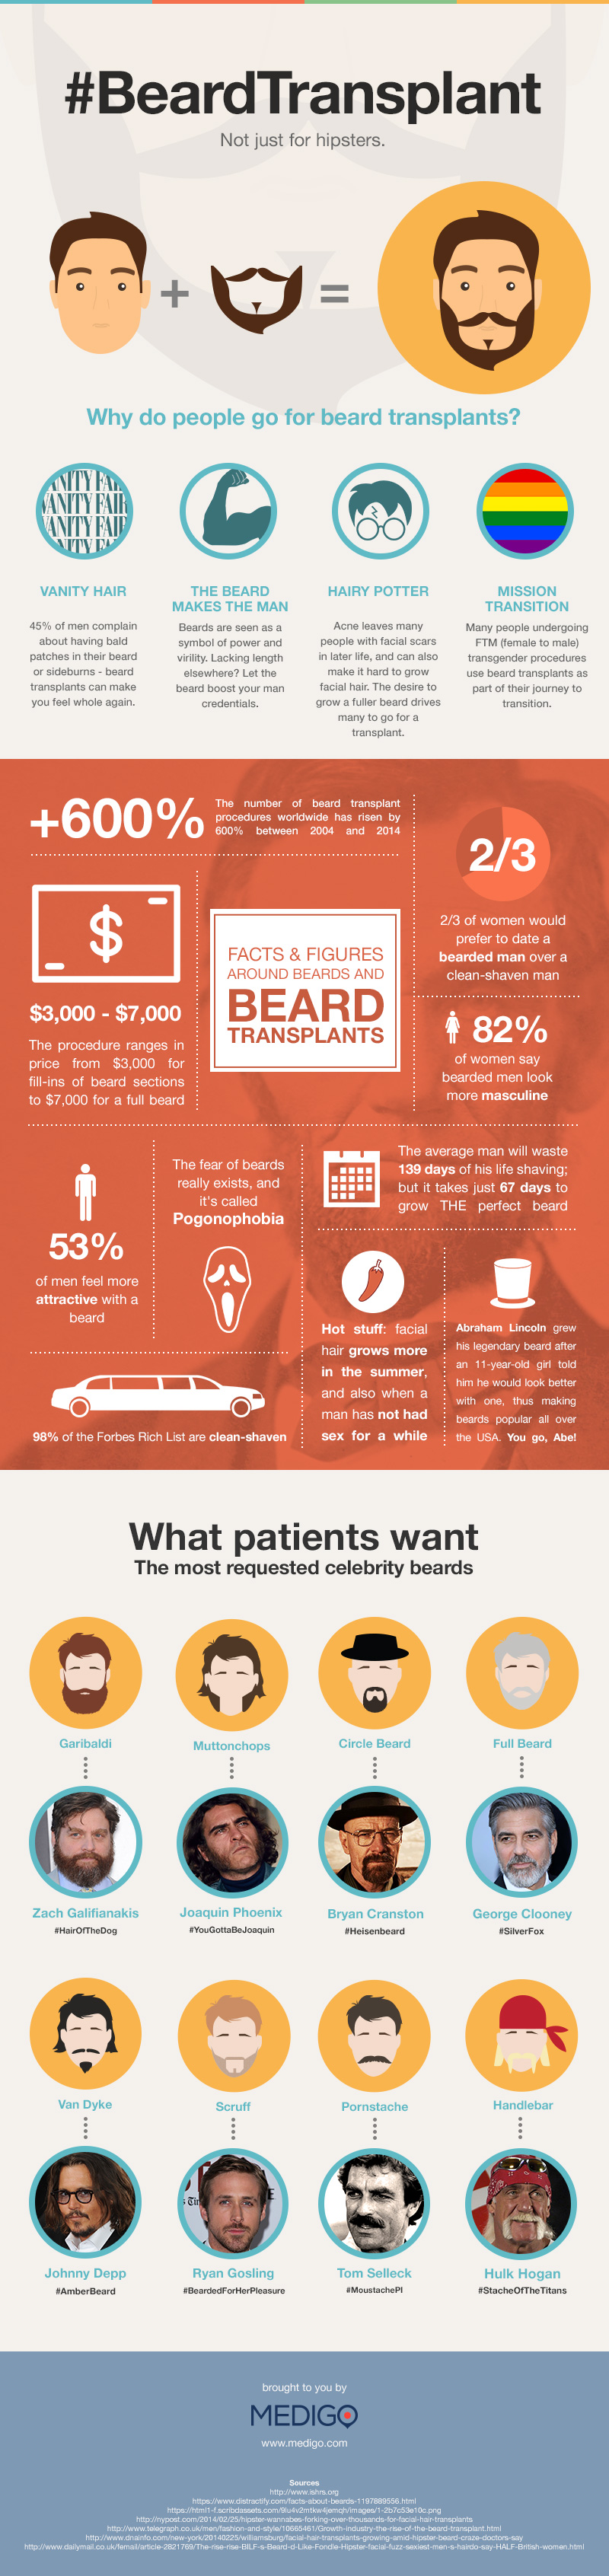 What is a Beard Transplant? 